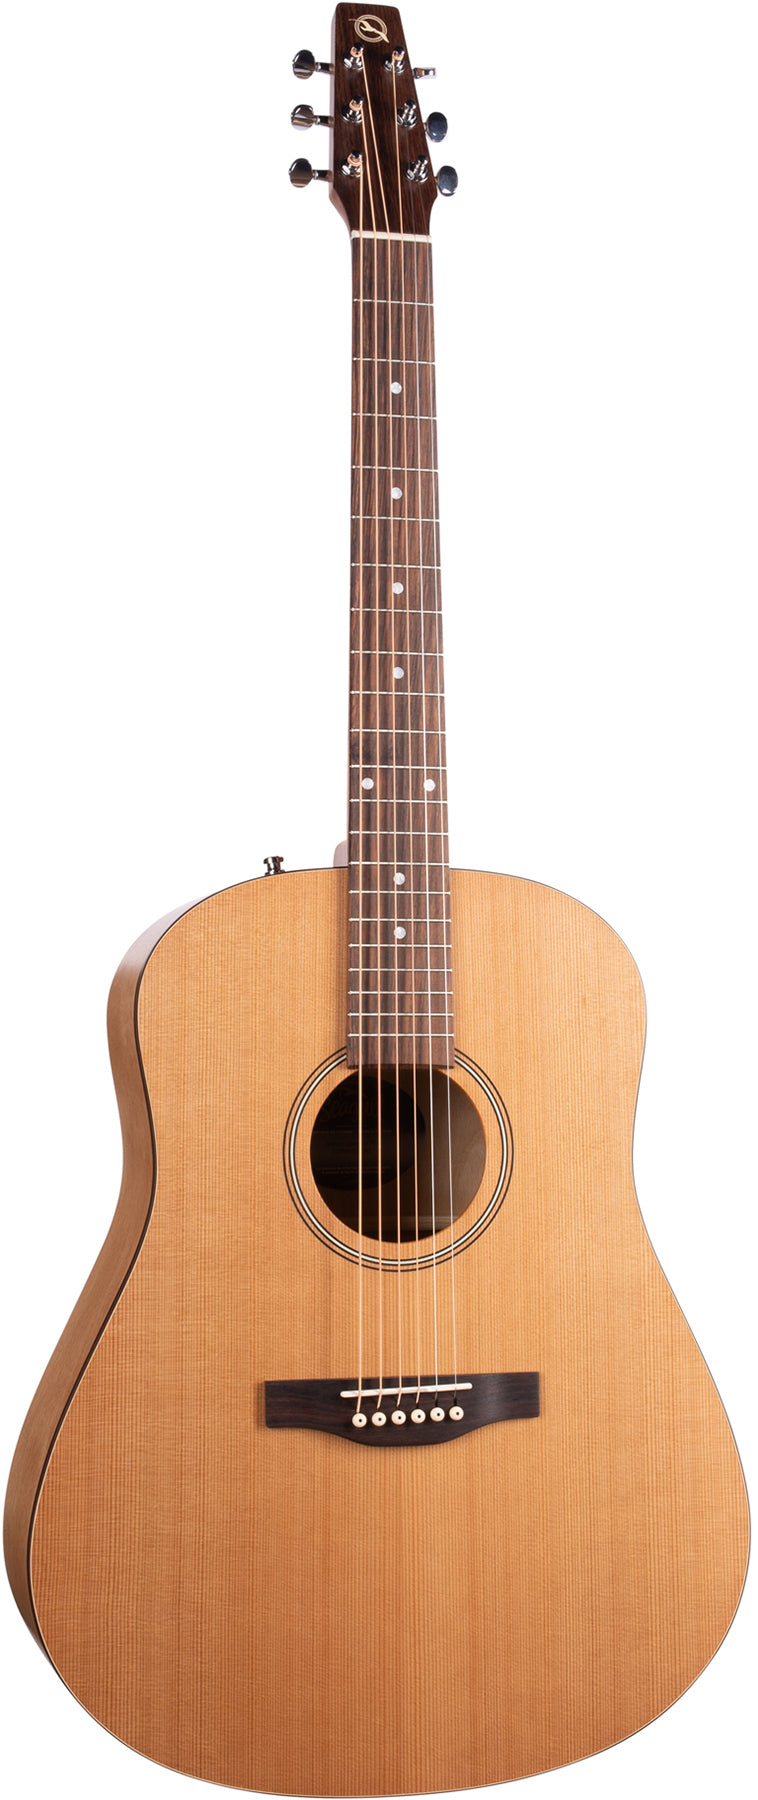 Seagull 052431 S6 Collection 1982 Series Natural 6 String Acoustic Guitar Right Hand